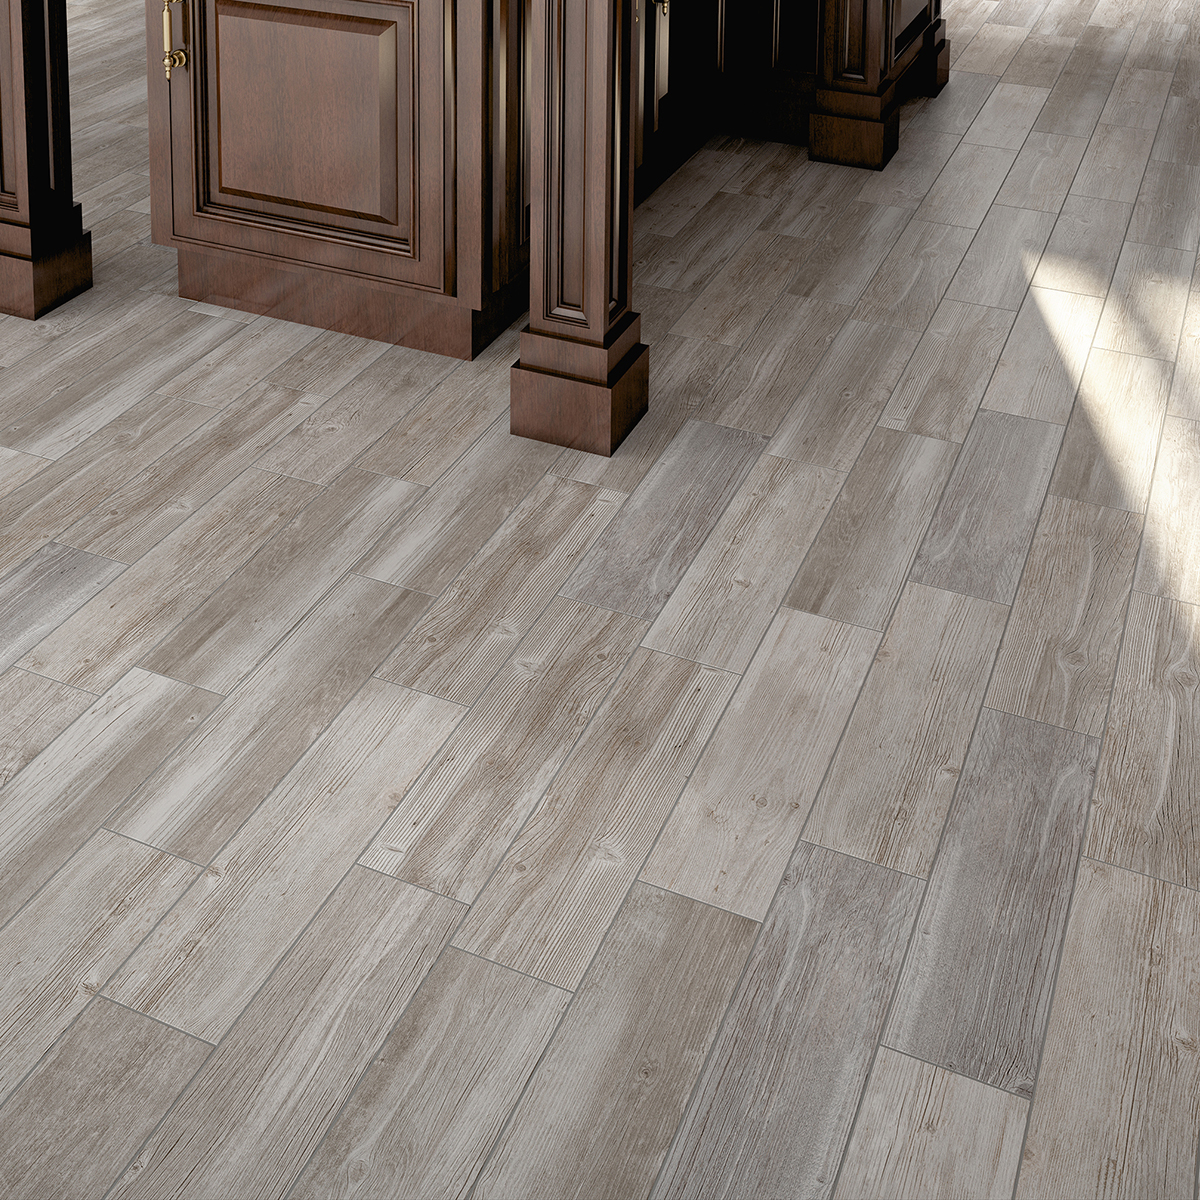 Lowes wooden tiles